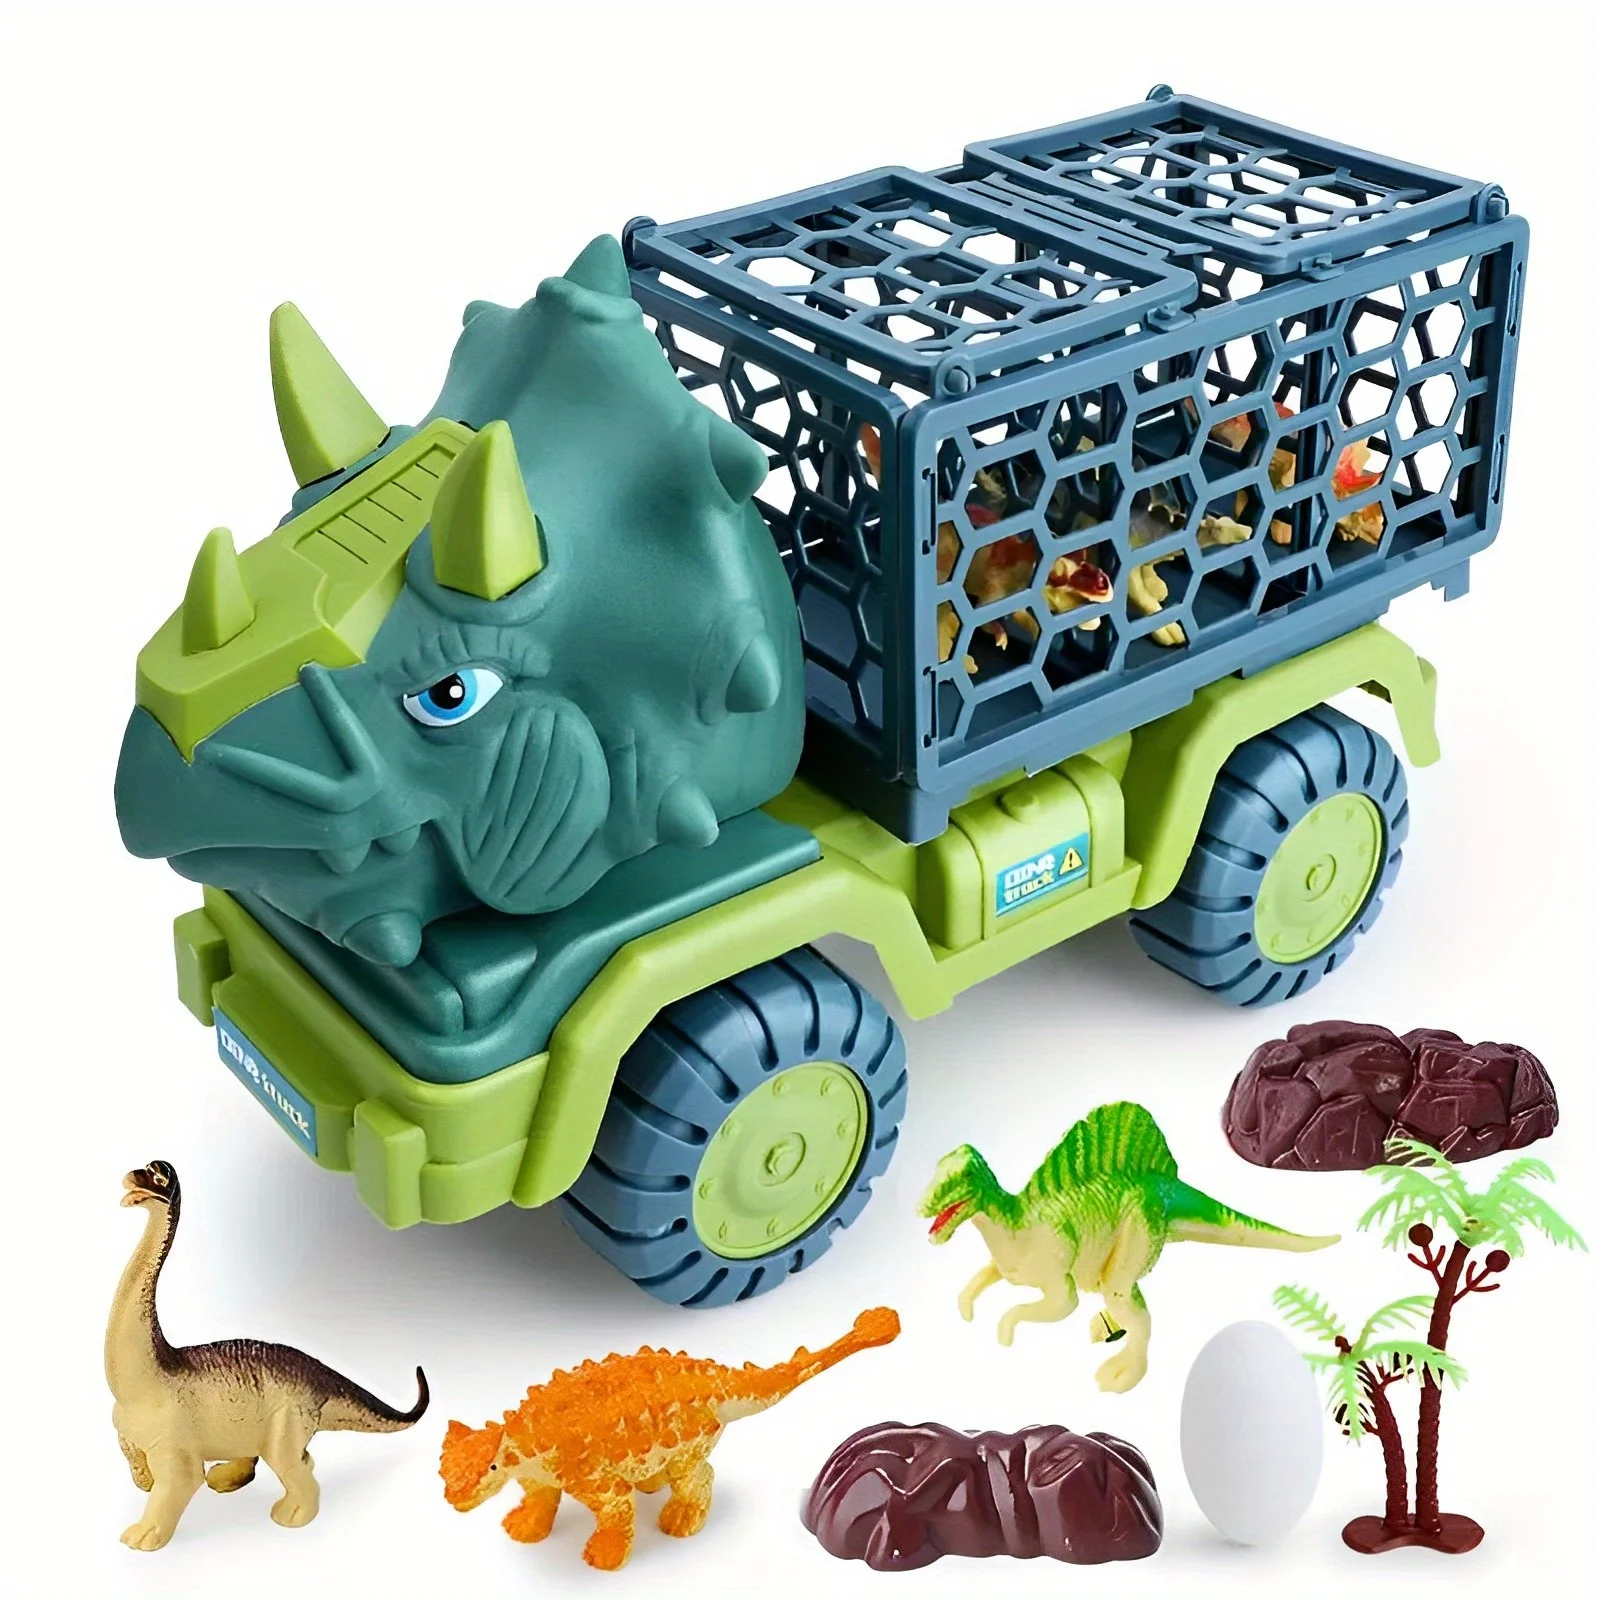 

Children Dinosaur Transport Car Toy Oversized Inertial Cars Carrier Truck Toy Pull Back Vehicle with Dinosaur Gift for Kids Boy